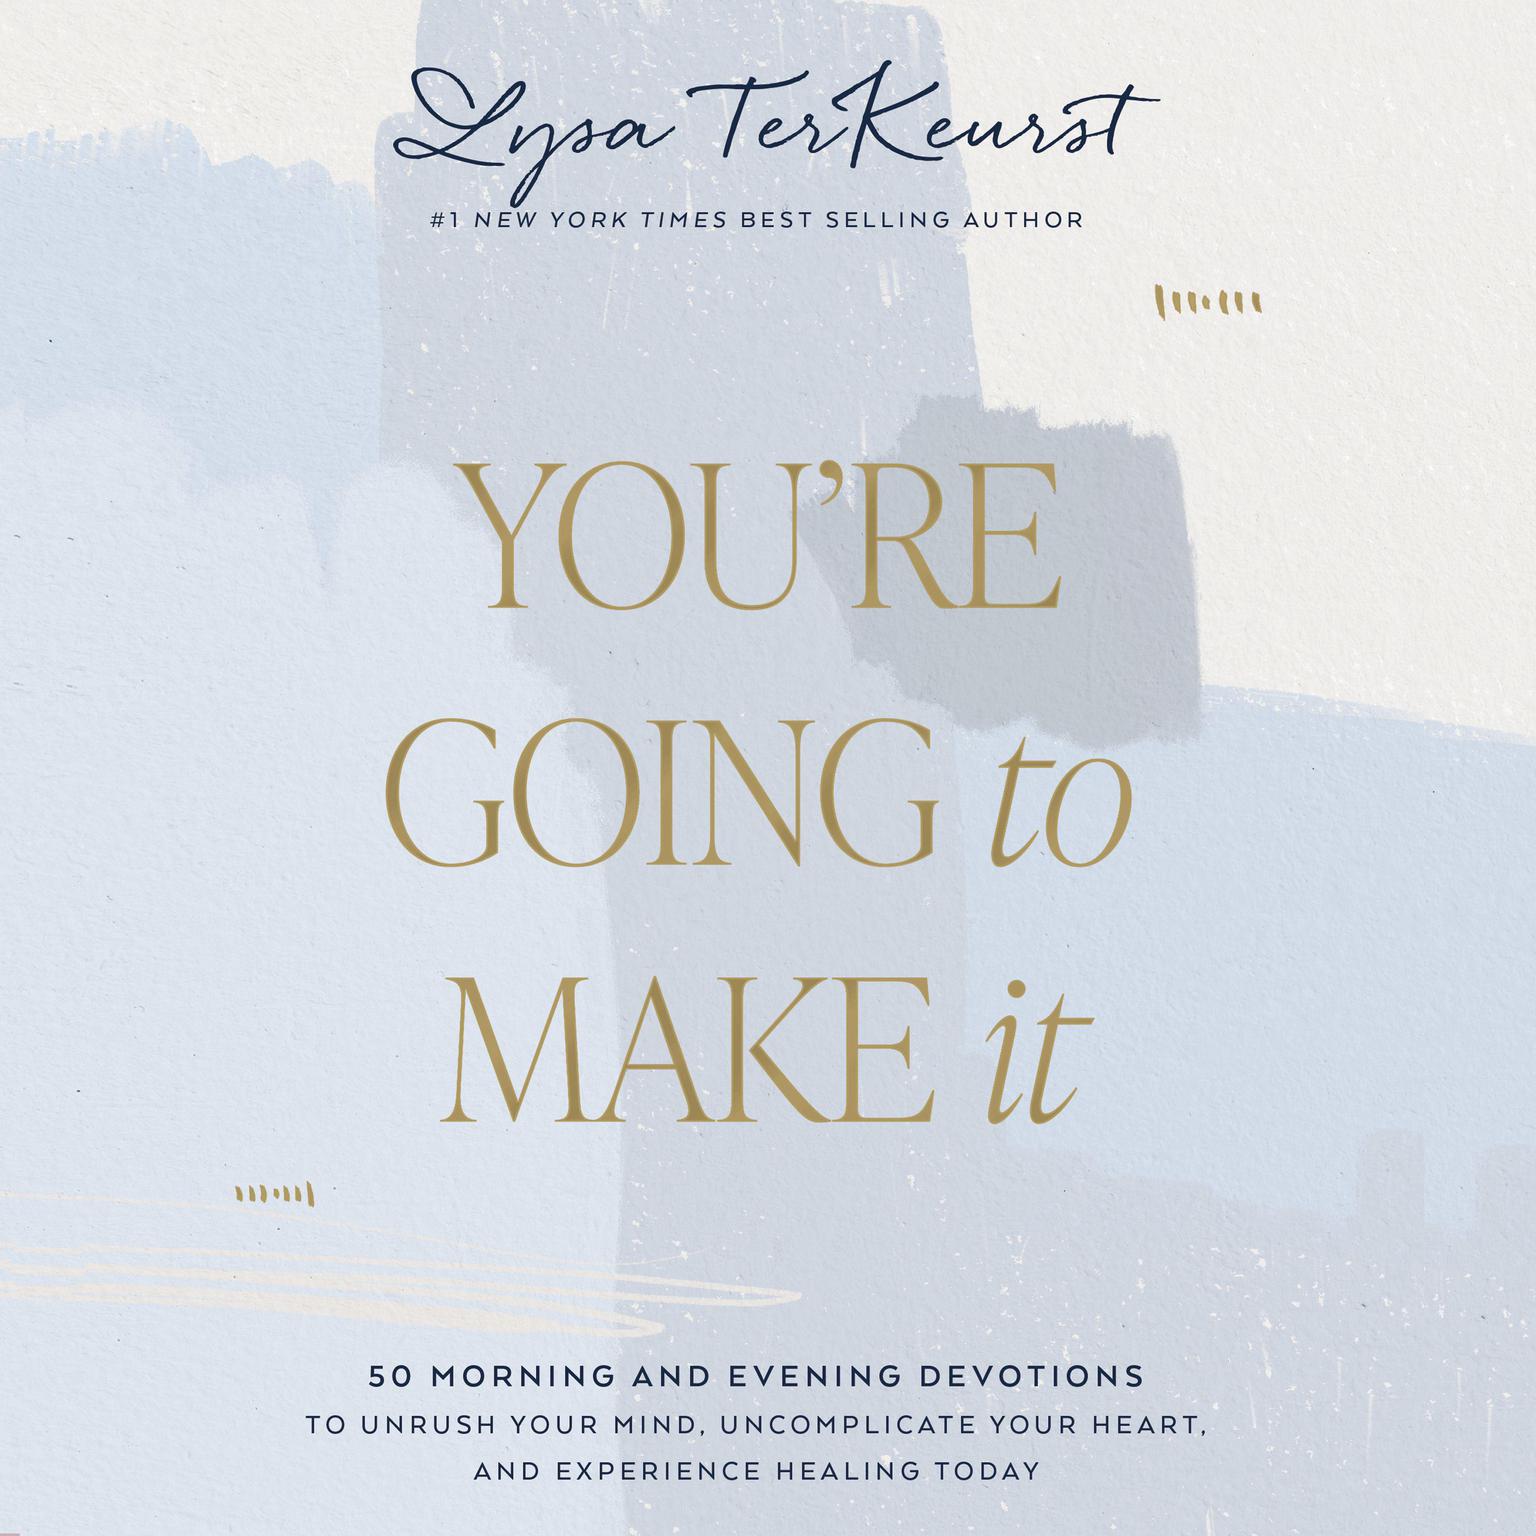 Youre Going to Make It: 50 Morning and Evening Devotions to Unrush Your Mind, Uncomplicate Your Heart, and Experience Healing Today Audiobook, by Lysa TerKeurst